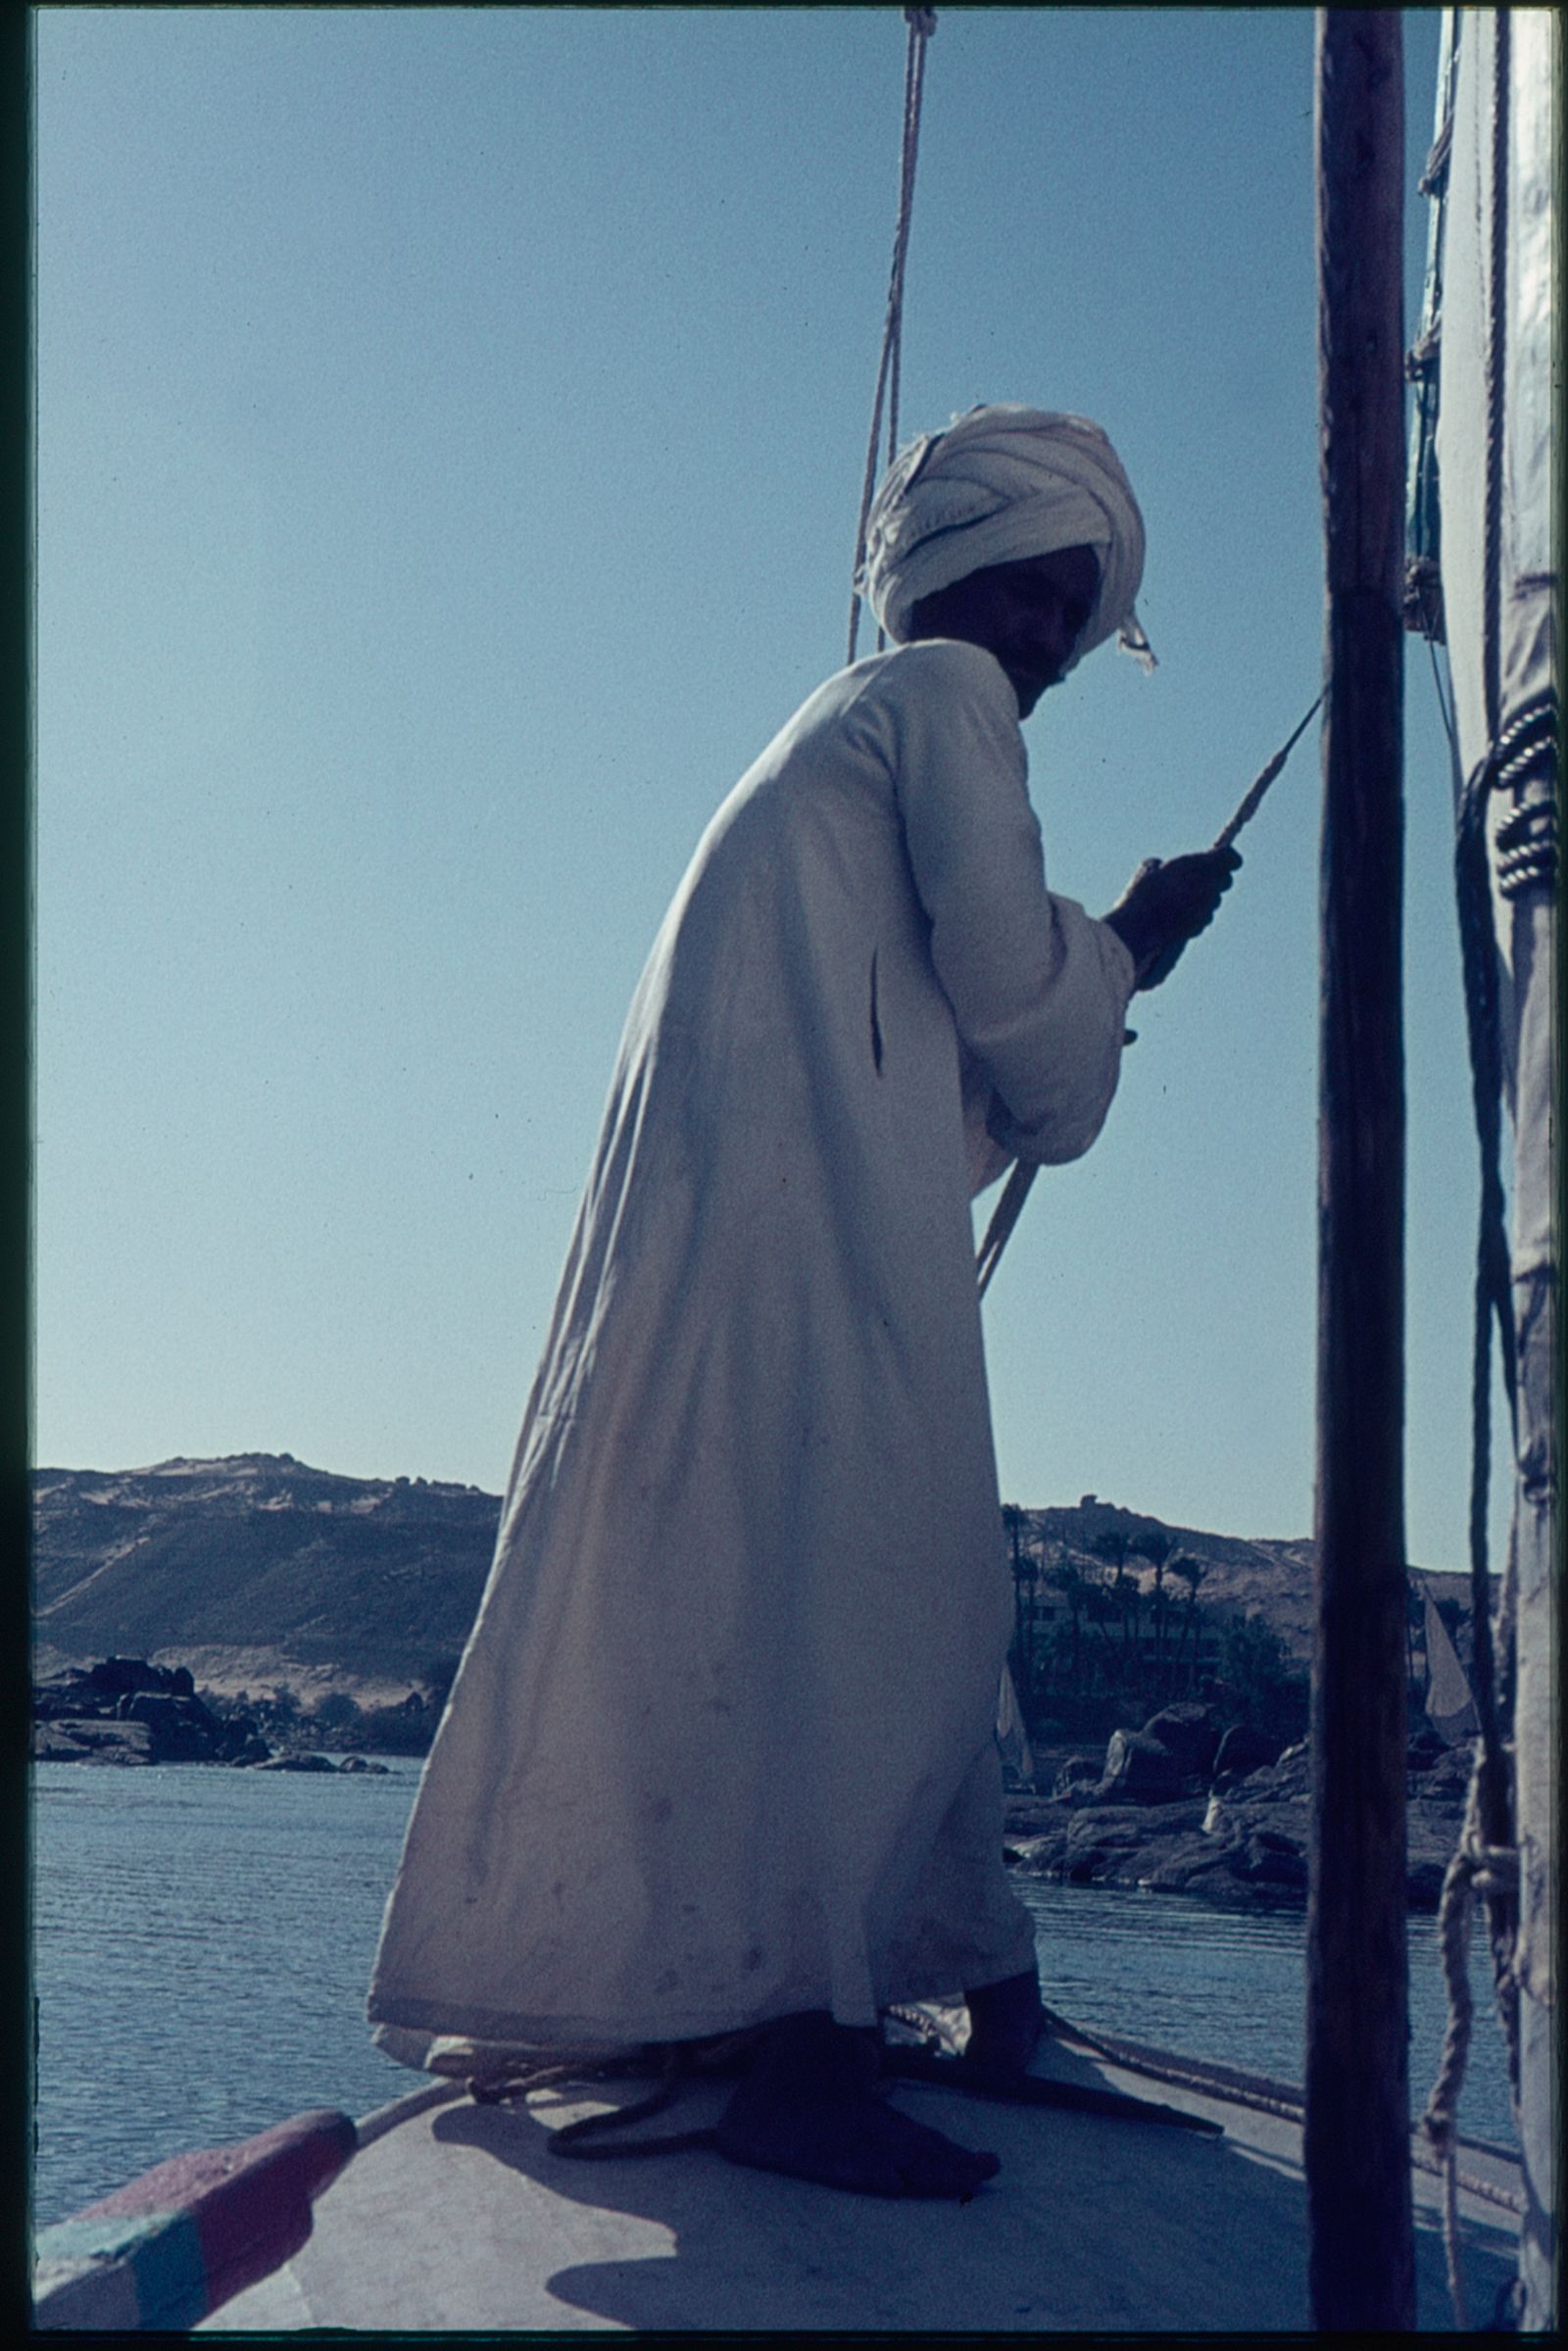 © Anne Ackermann - An image from my dad's archive taken during a trip through Egypt, ca. 1973.